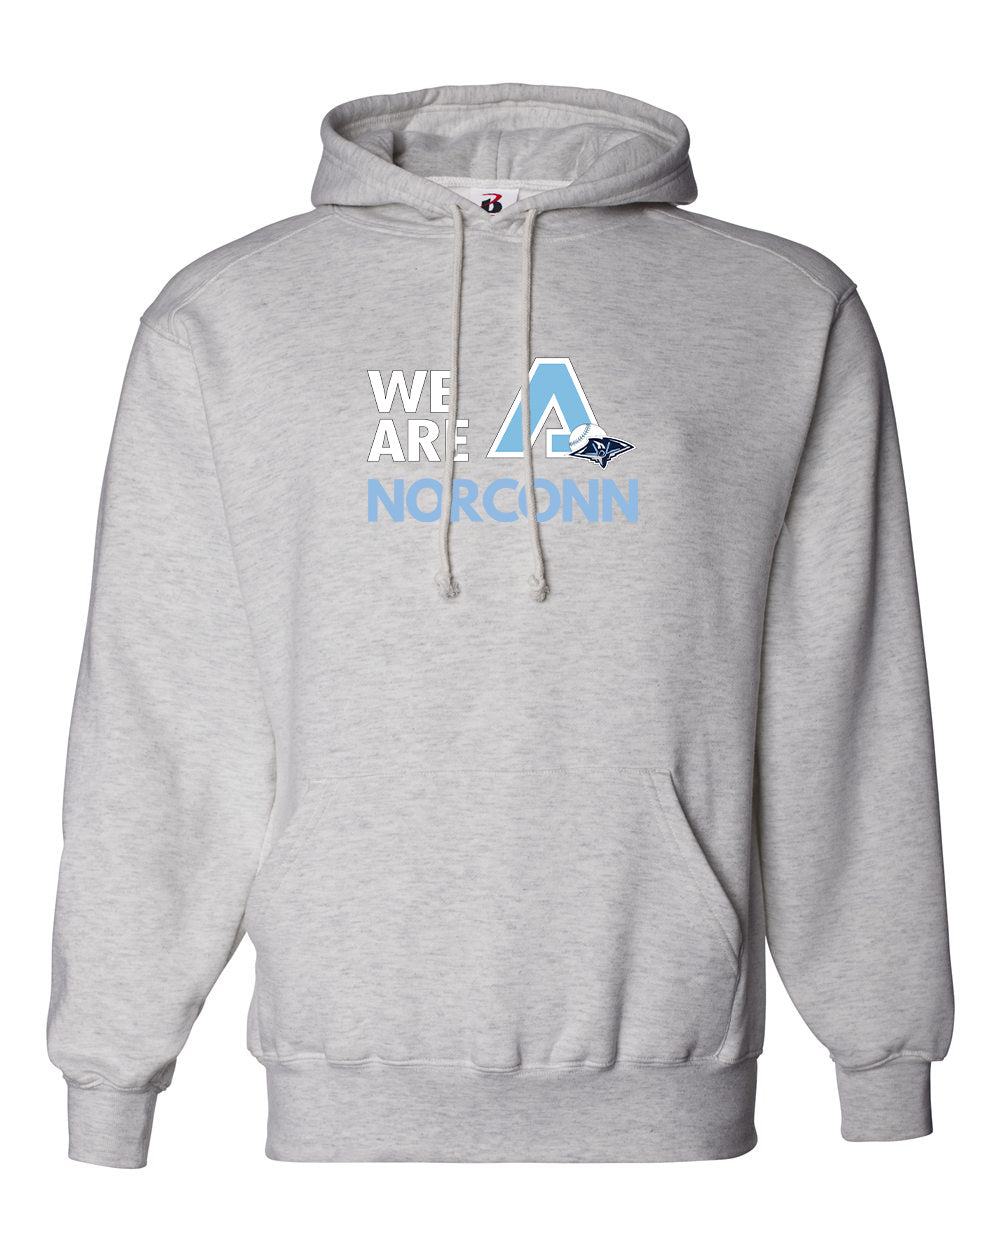 Norconn Adult Badger Fleece Hoodie "We Are" - 1254 (color options available)